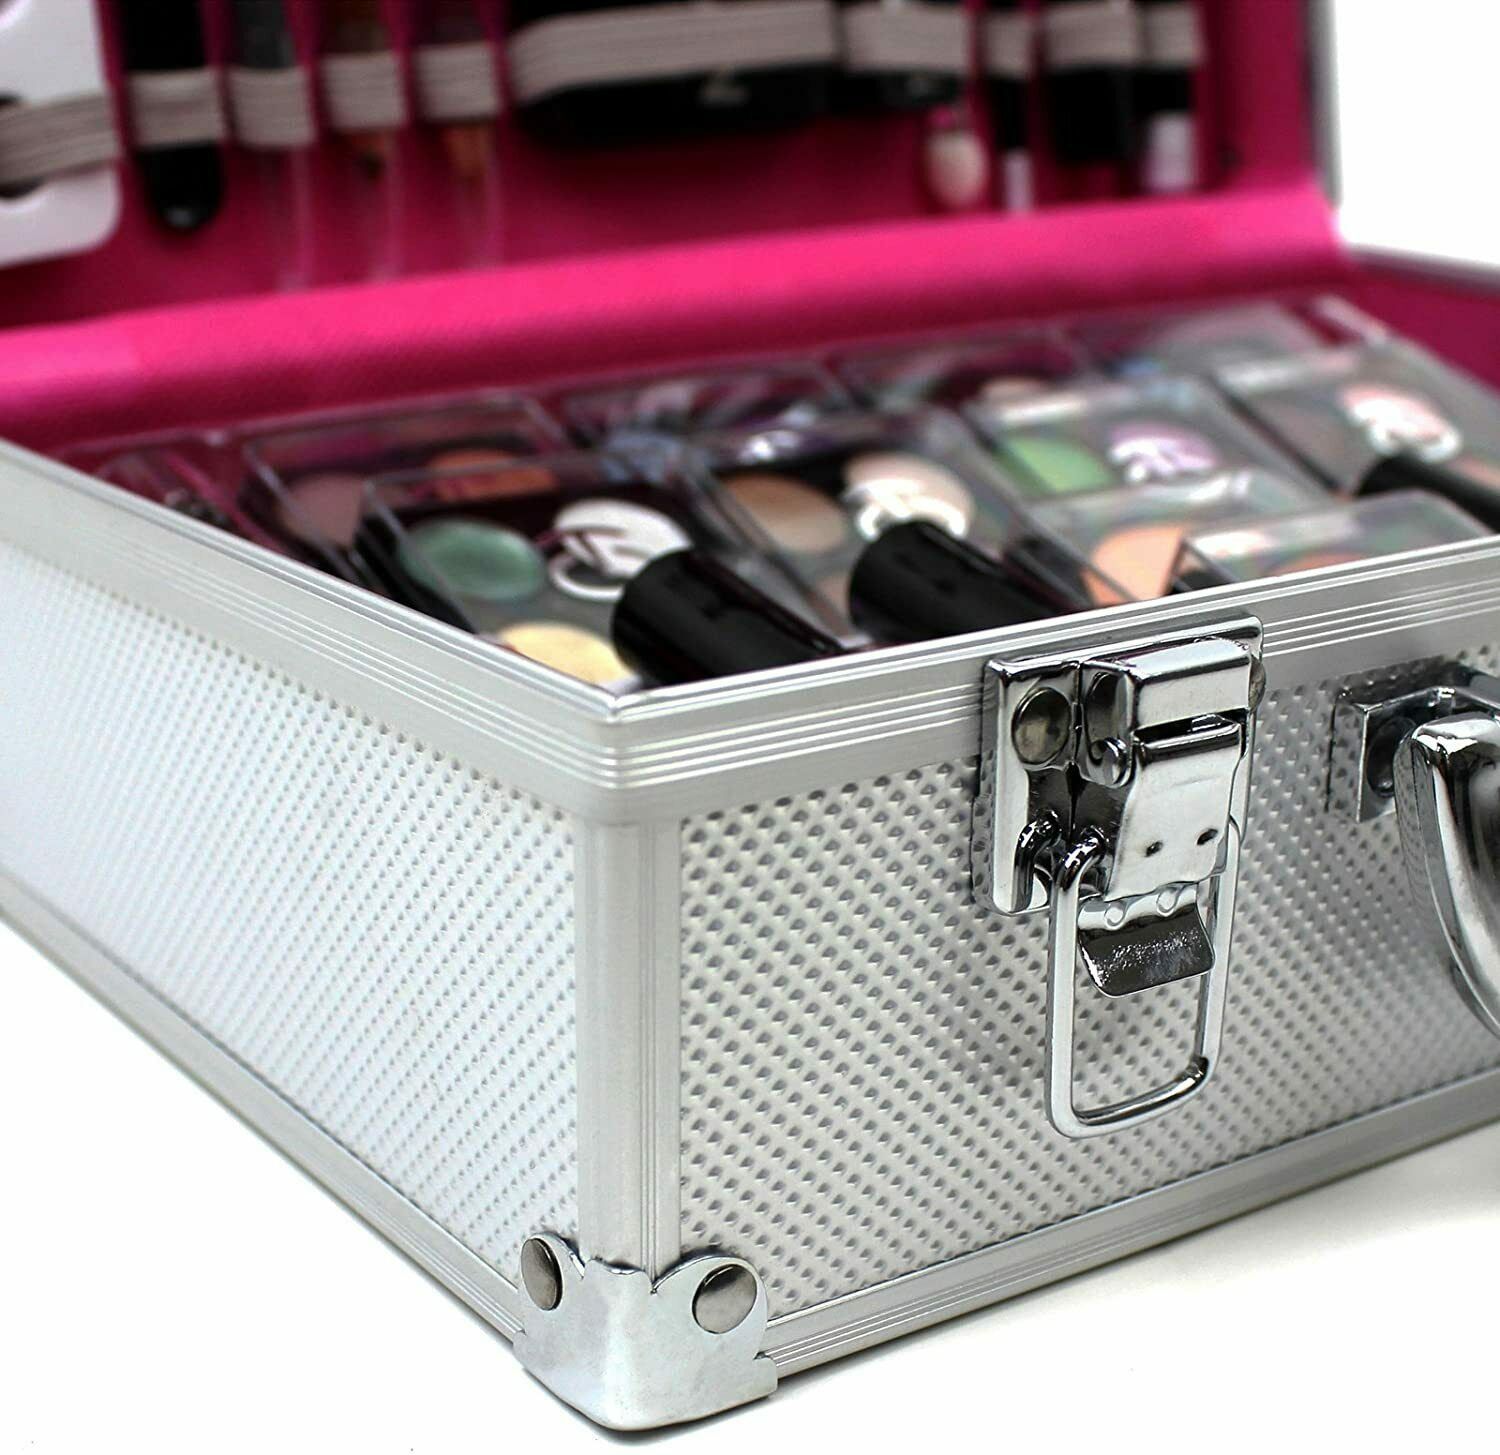 Love Urban Beauty Box Vanity Case Cosmetic Make Up Storage 60 Piece.  With this Urban Beauty 60 Piece Vanity Case, you can have everything a young woman needs to look their best, no matter what your taste. This set is perfect both for people just starting to take an interest in cosmetics, with a wide range of makeup in an array of shades to help you find the look that suits you best, as well as catering to the more experienced, allowing them to experiment with more daring combinations whilst still having their favorites at hand. 

This set comes presented in a stylish and sturdy vanity case, that not only makes this set ideal for giving you a great new look, but also for taking this set with you wherever you go. The brushes are specially designed to give you a precise and tailored look, allowing you to add just the right layer of definition to perfect your image. So whatever you are looking for, whether at home or away, this Urban Beauty Vanity Case is just the thing for solving all of your cosmetic needs.

Product Features : 

All women's essentials in one elegant box.
A great gift for any occasion.
Includes a convenient compact, ideal for the handbag on nights out.
Box Contains :
8x Eyeshadow Quad Palettes (32 Individual Colours) 
4x cream eyeshadows 
2x Blushes 
2x Lipglosses 
2x Lipsticks
4x Nail Polish 1x double-ended Eye Pencil 
1x double-ended Eye Pencil 
1x Eyebrow Pencil 
1x double-ended Lip Pencil 
1x Mascara 
2x double-ended applicators 1x Blusher Brush 
1x Selection Nail Stickers 
1x Pencil Sharpener 
1x Toe Separator 
1x Nail File 
1x Nail Clipper And an elegant, re-useable, silver case (with an in-built mirror) to hold all your cosmetic essentials